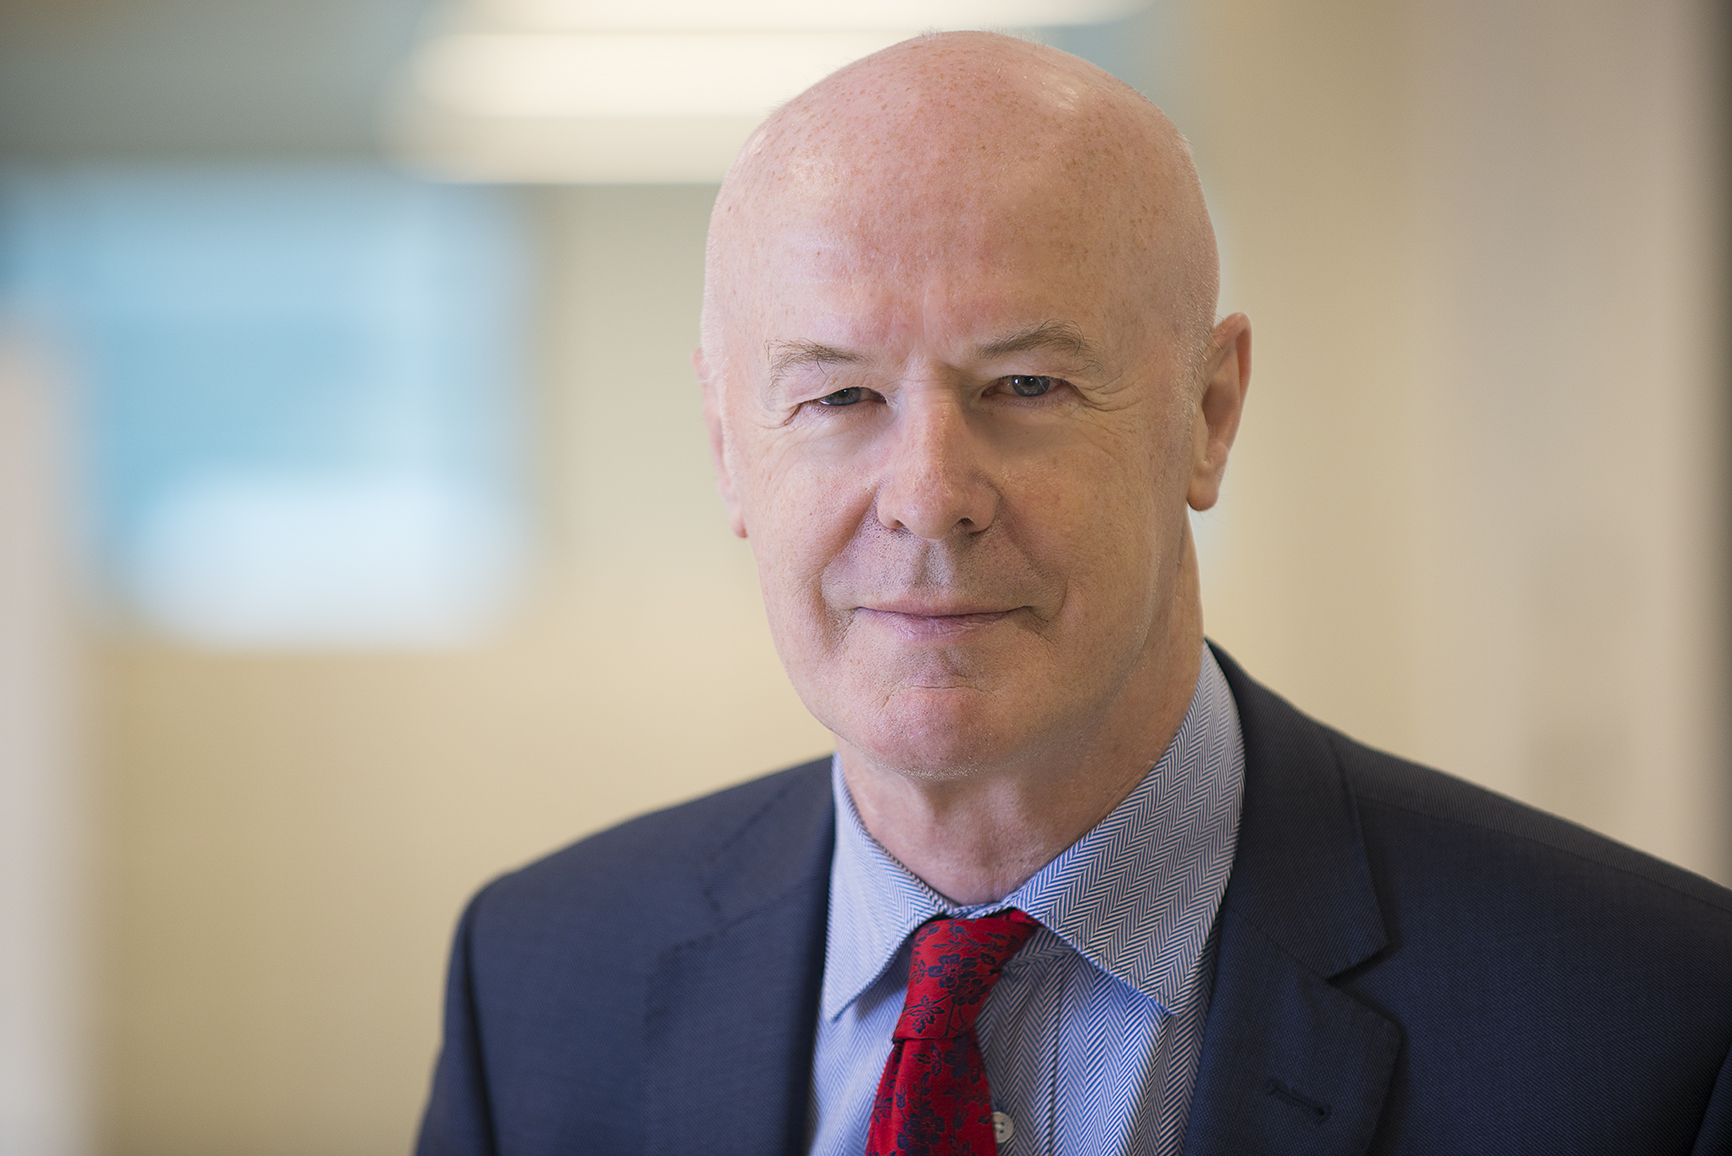 Fund management veteran Harry Nimmo to retire after 37